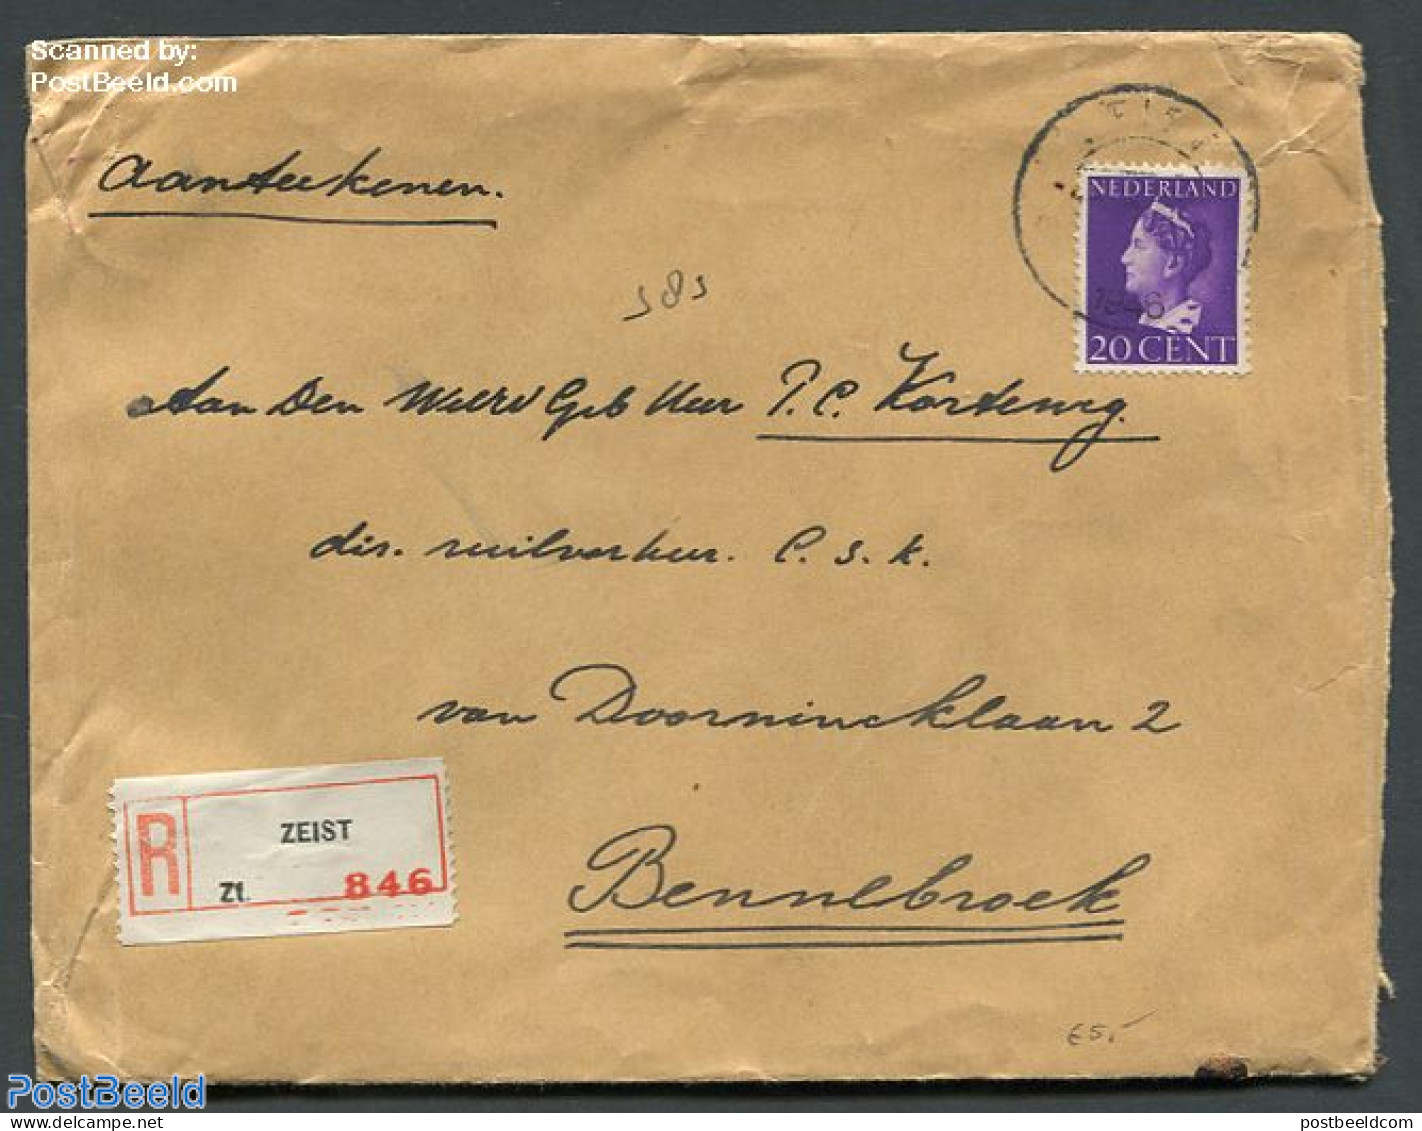 Netherlands 1940 Registered Cover From Zeist To Bennebroek, Postal History, History - Kings & Queens (Royalty) - Lettres & Documents